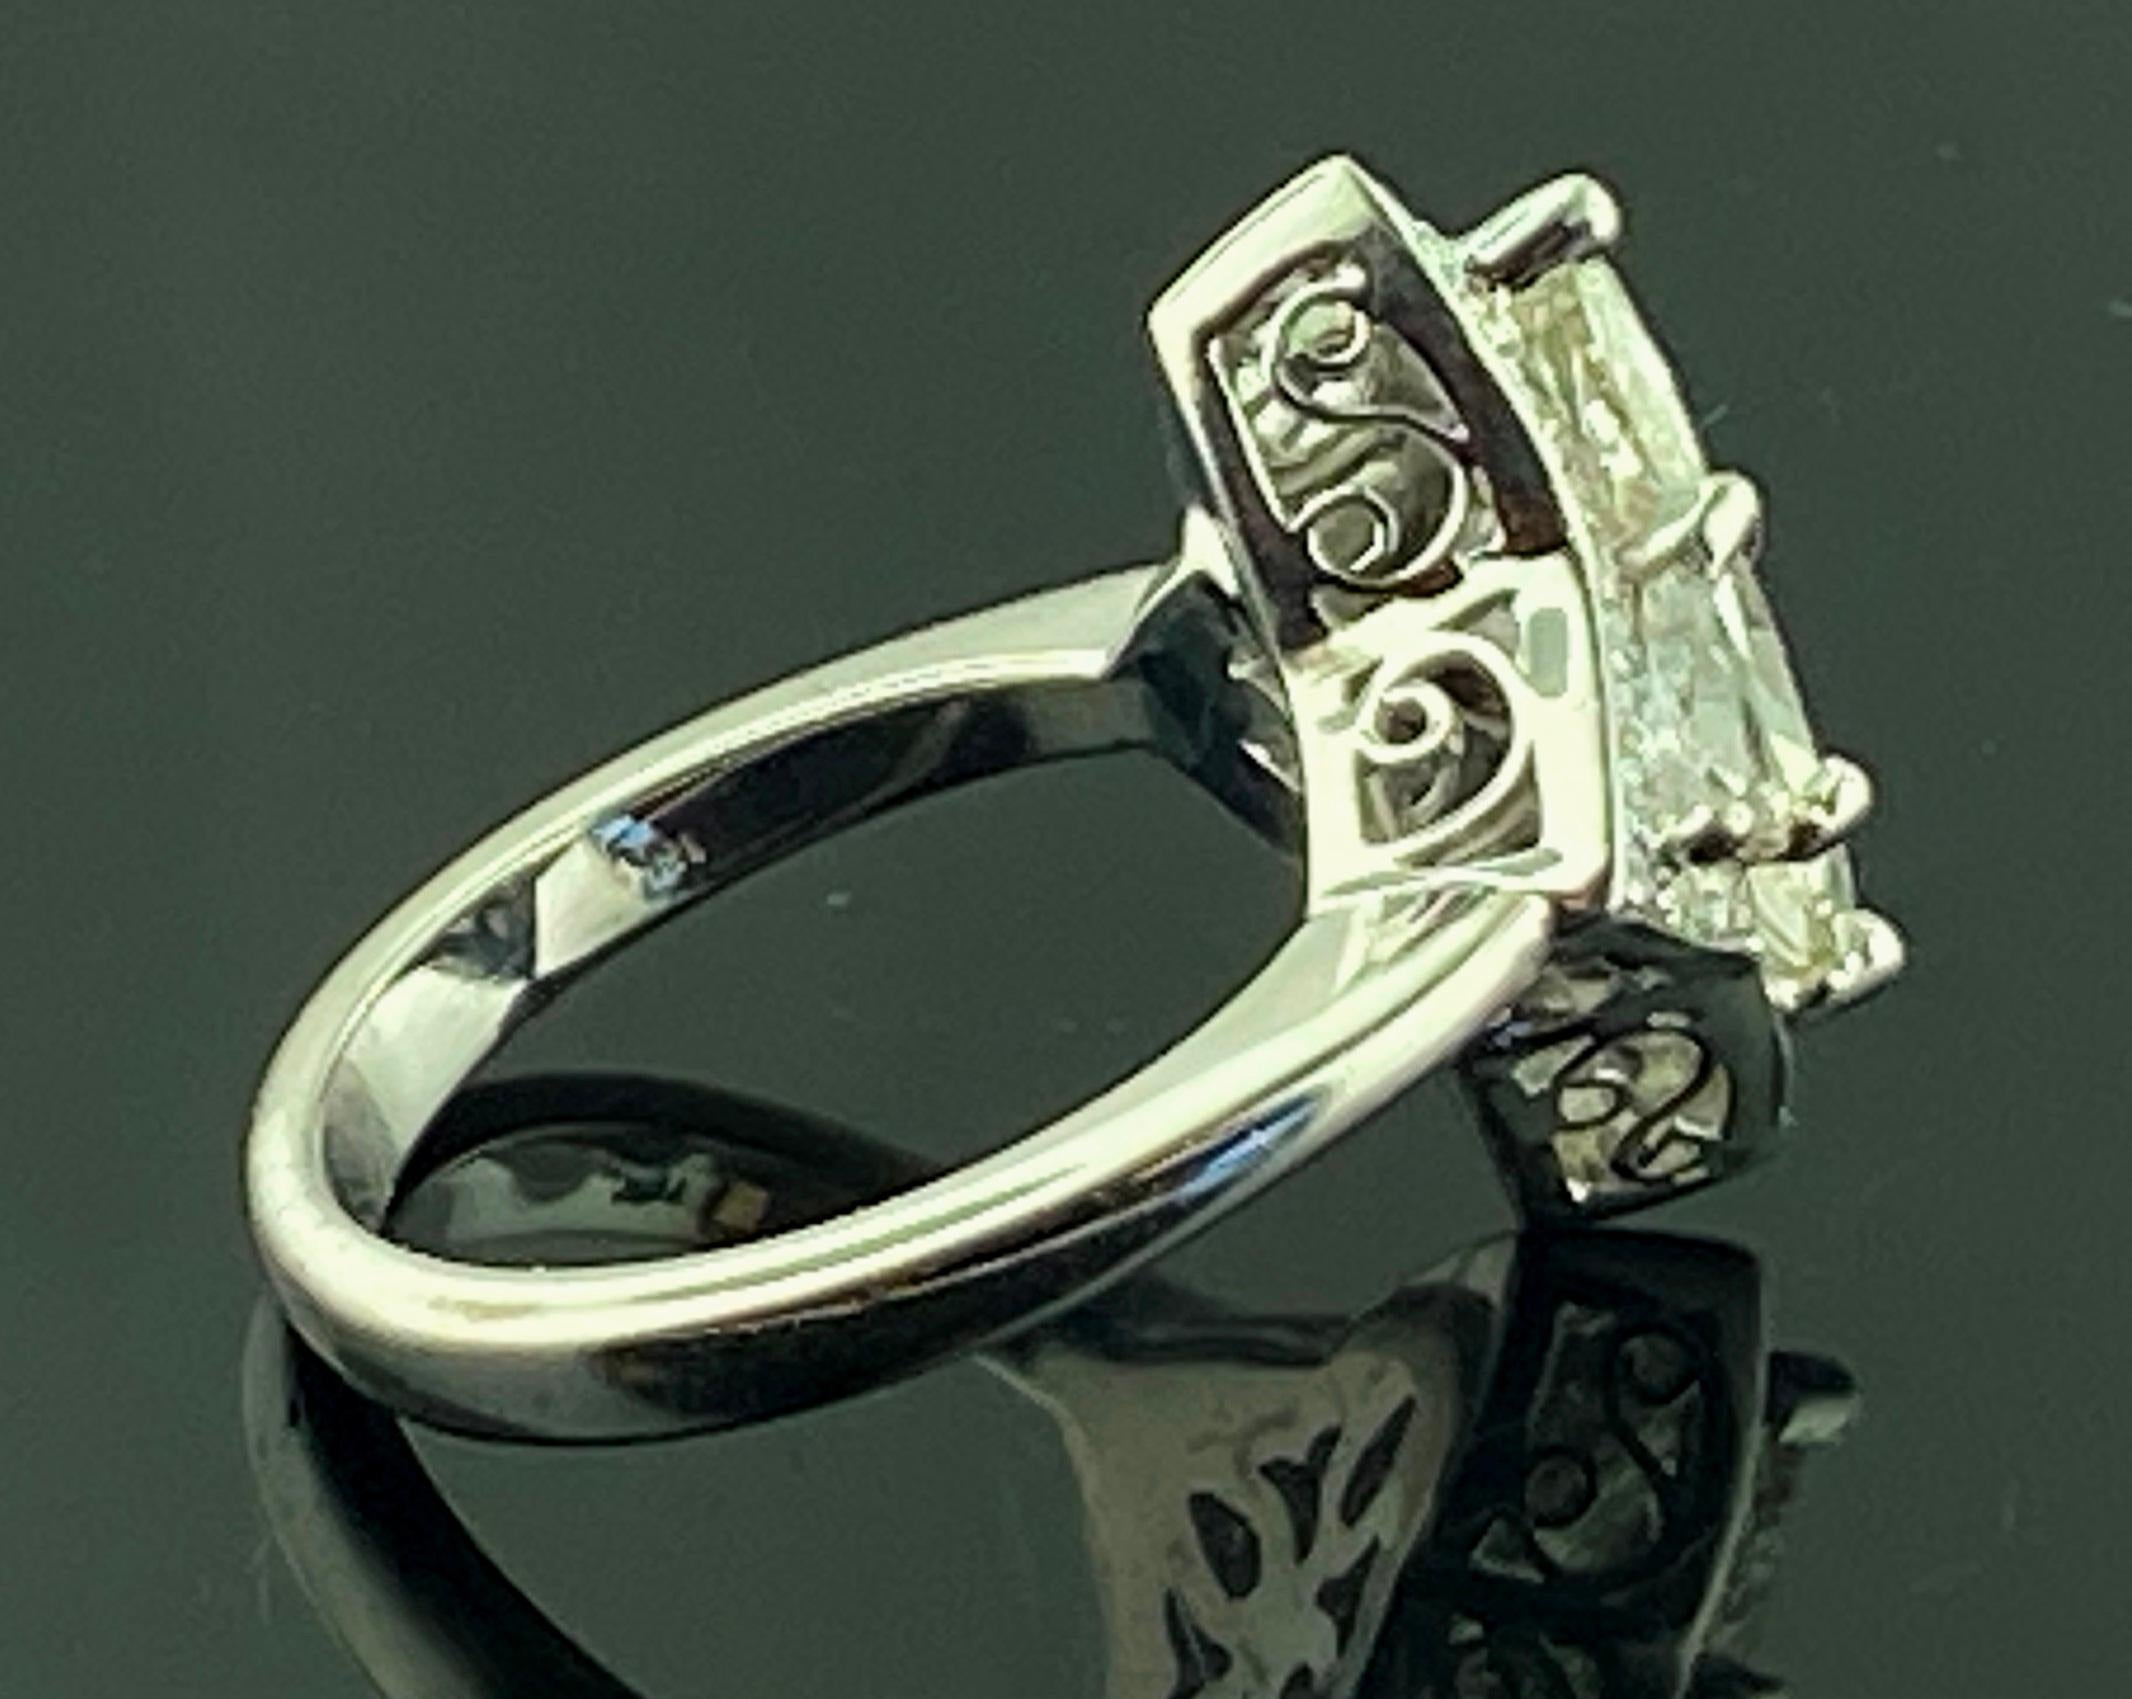 1.82 Carat GIA Marquise Diamond Ring in 18 KT White Gold In Excellent Condition For Sale In Palm Desert, CA